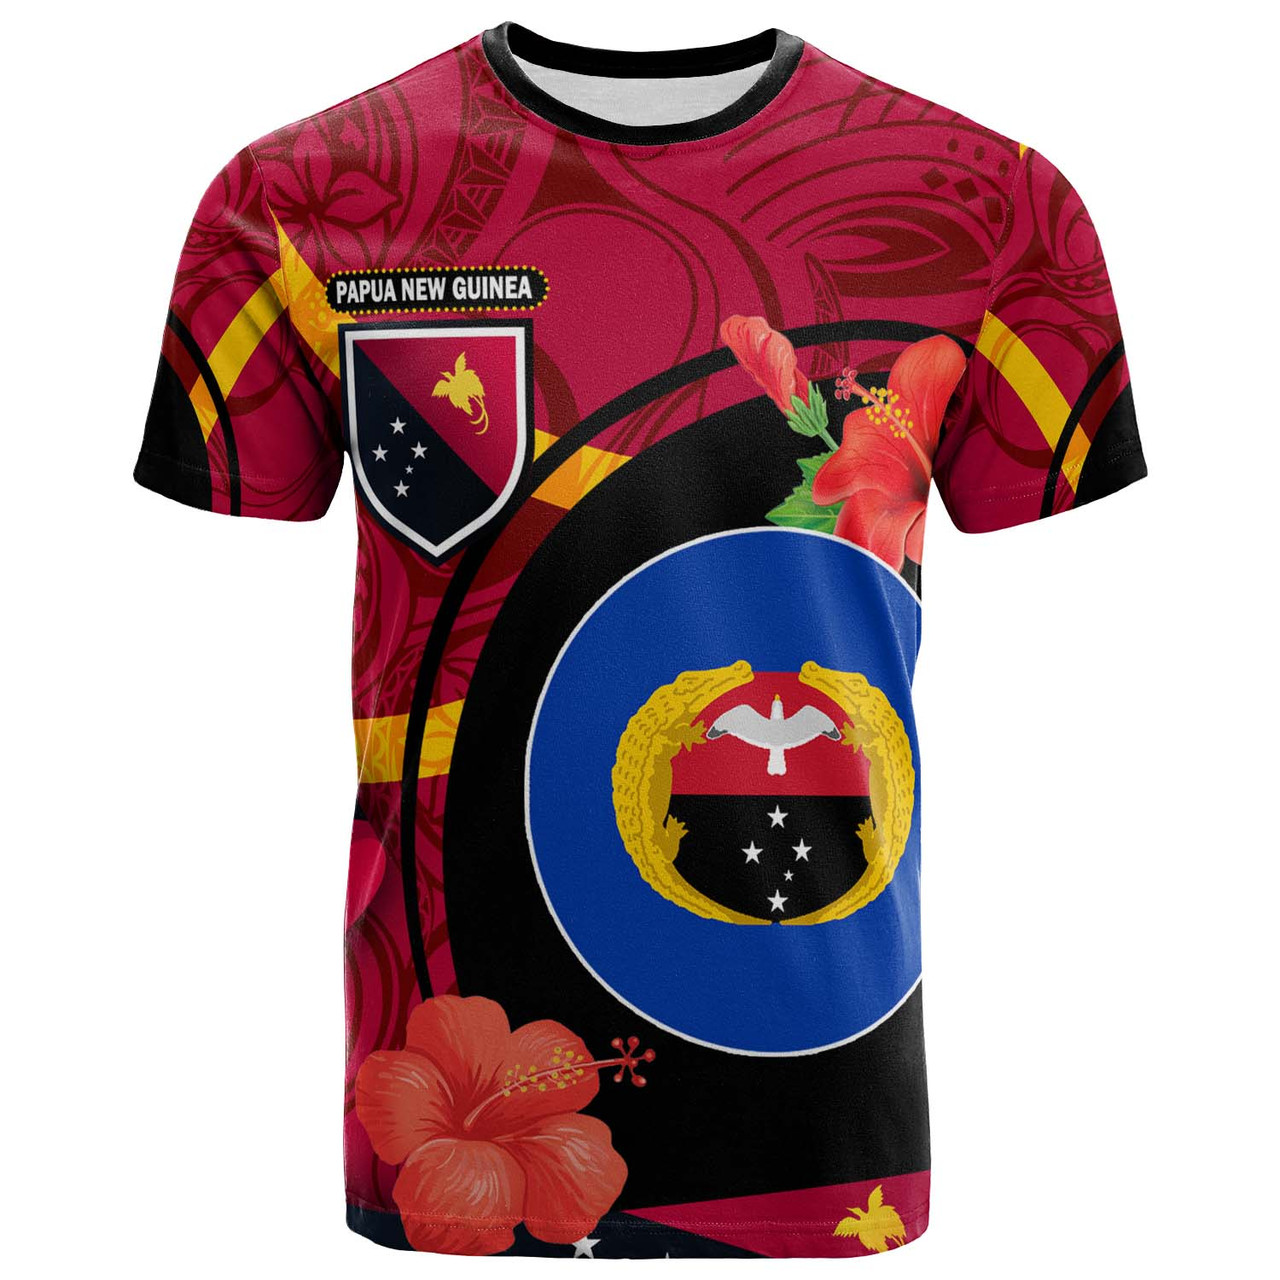 Papua New Guinea T-Shirt - Gulf Province Flag of PNG with Hibicus and Polynesian Culture T-Shirt